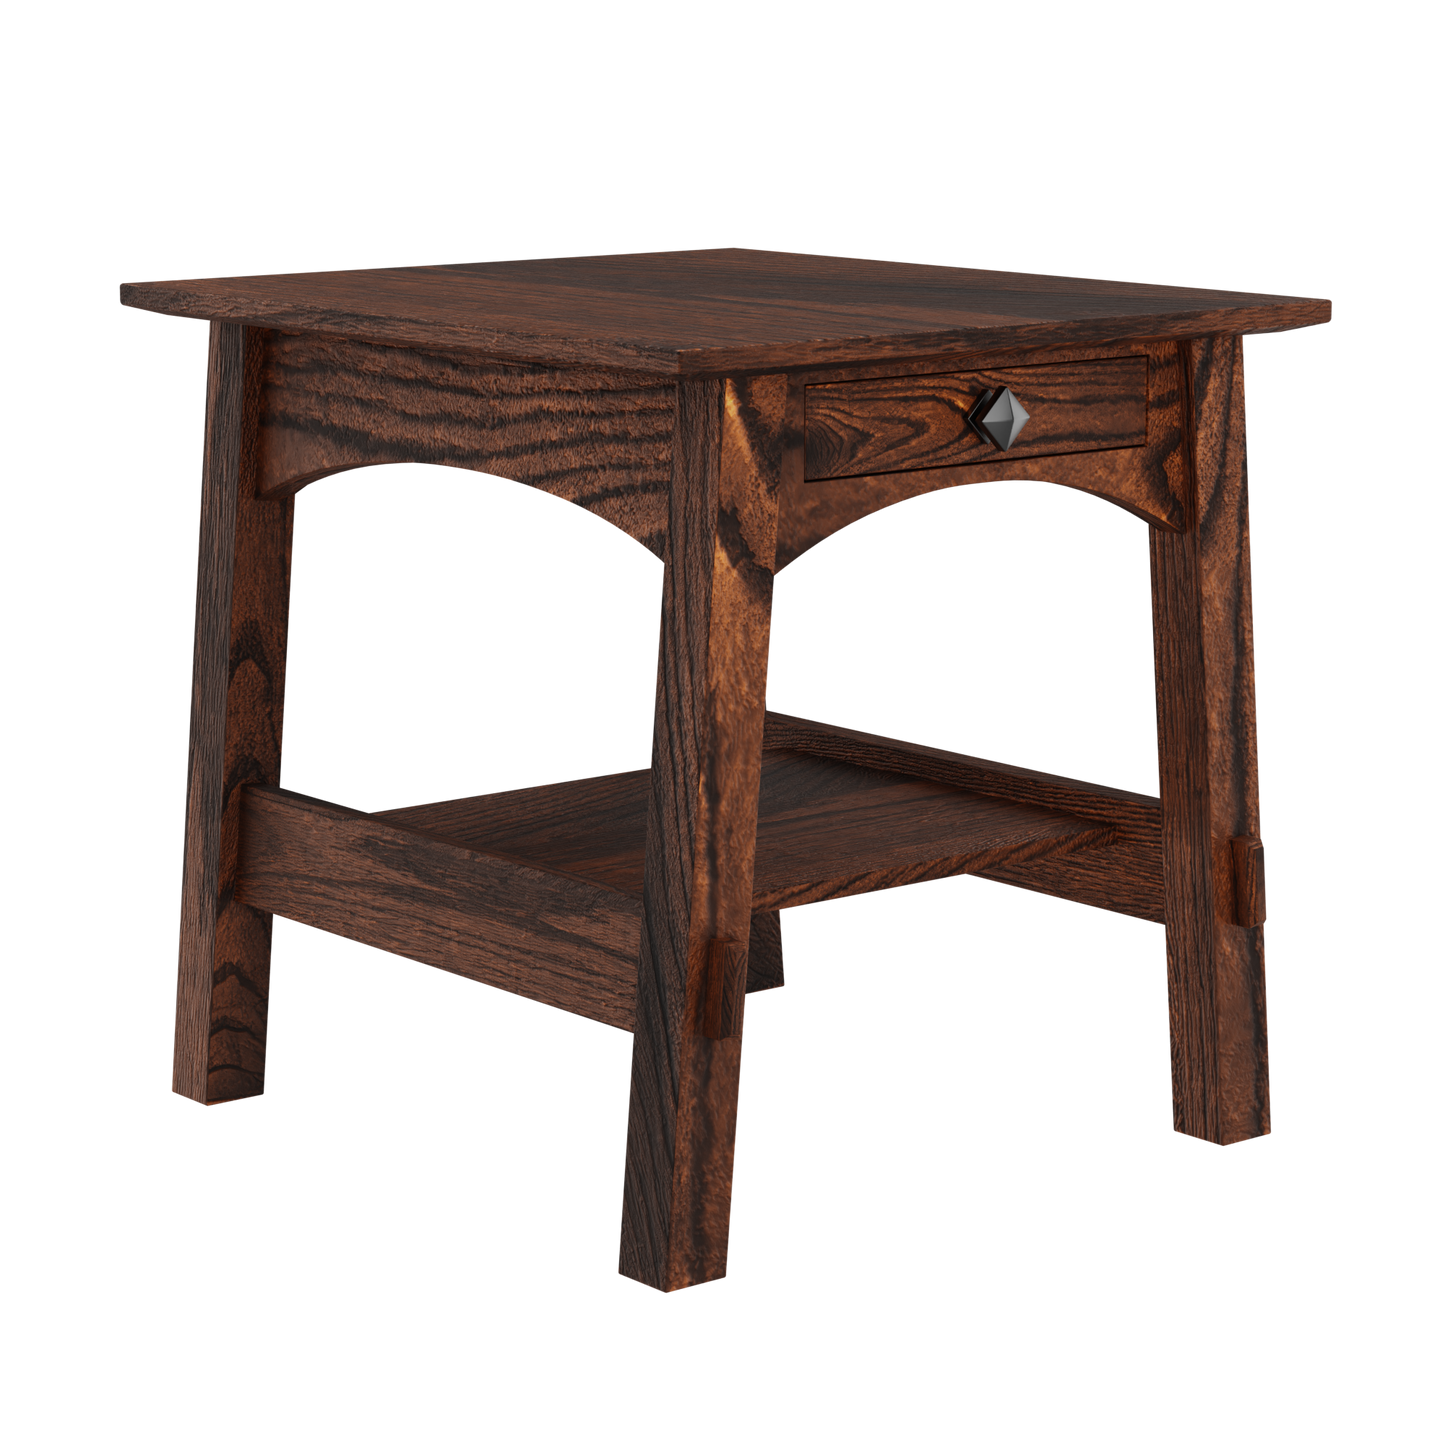 McCoy Craftsman End Table with Drawer